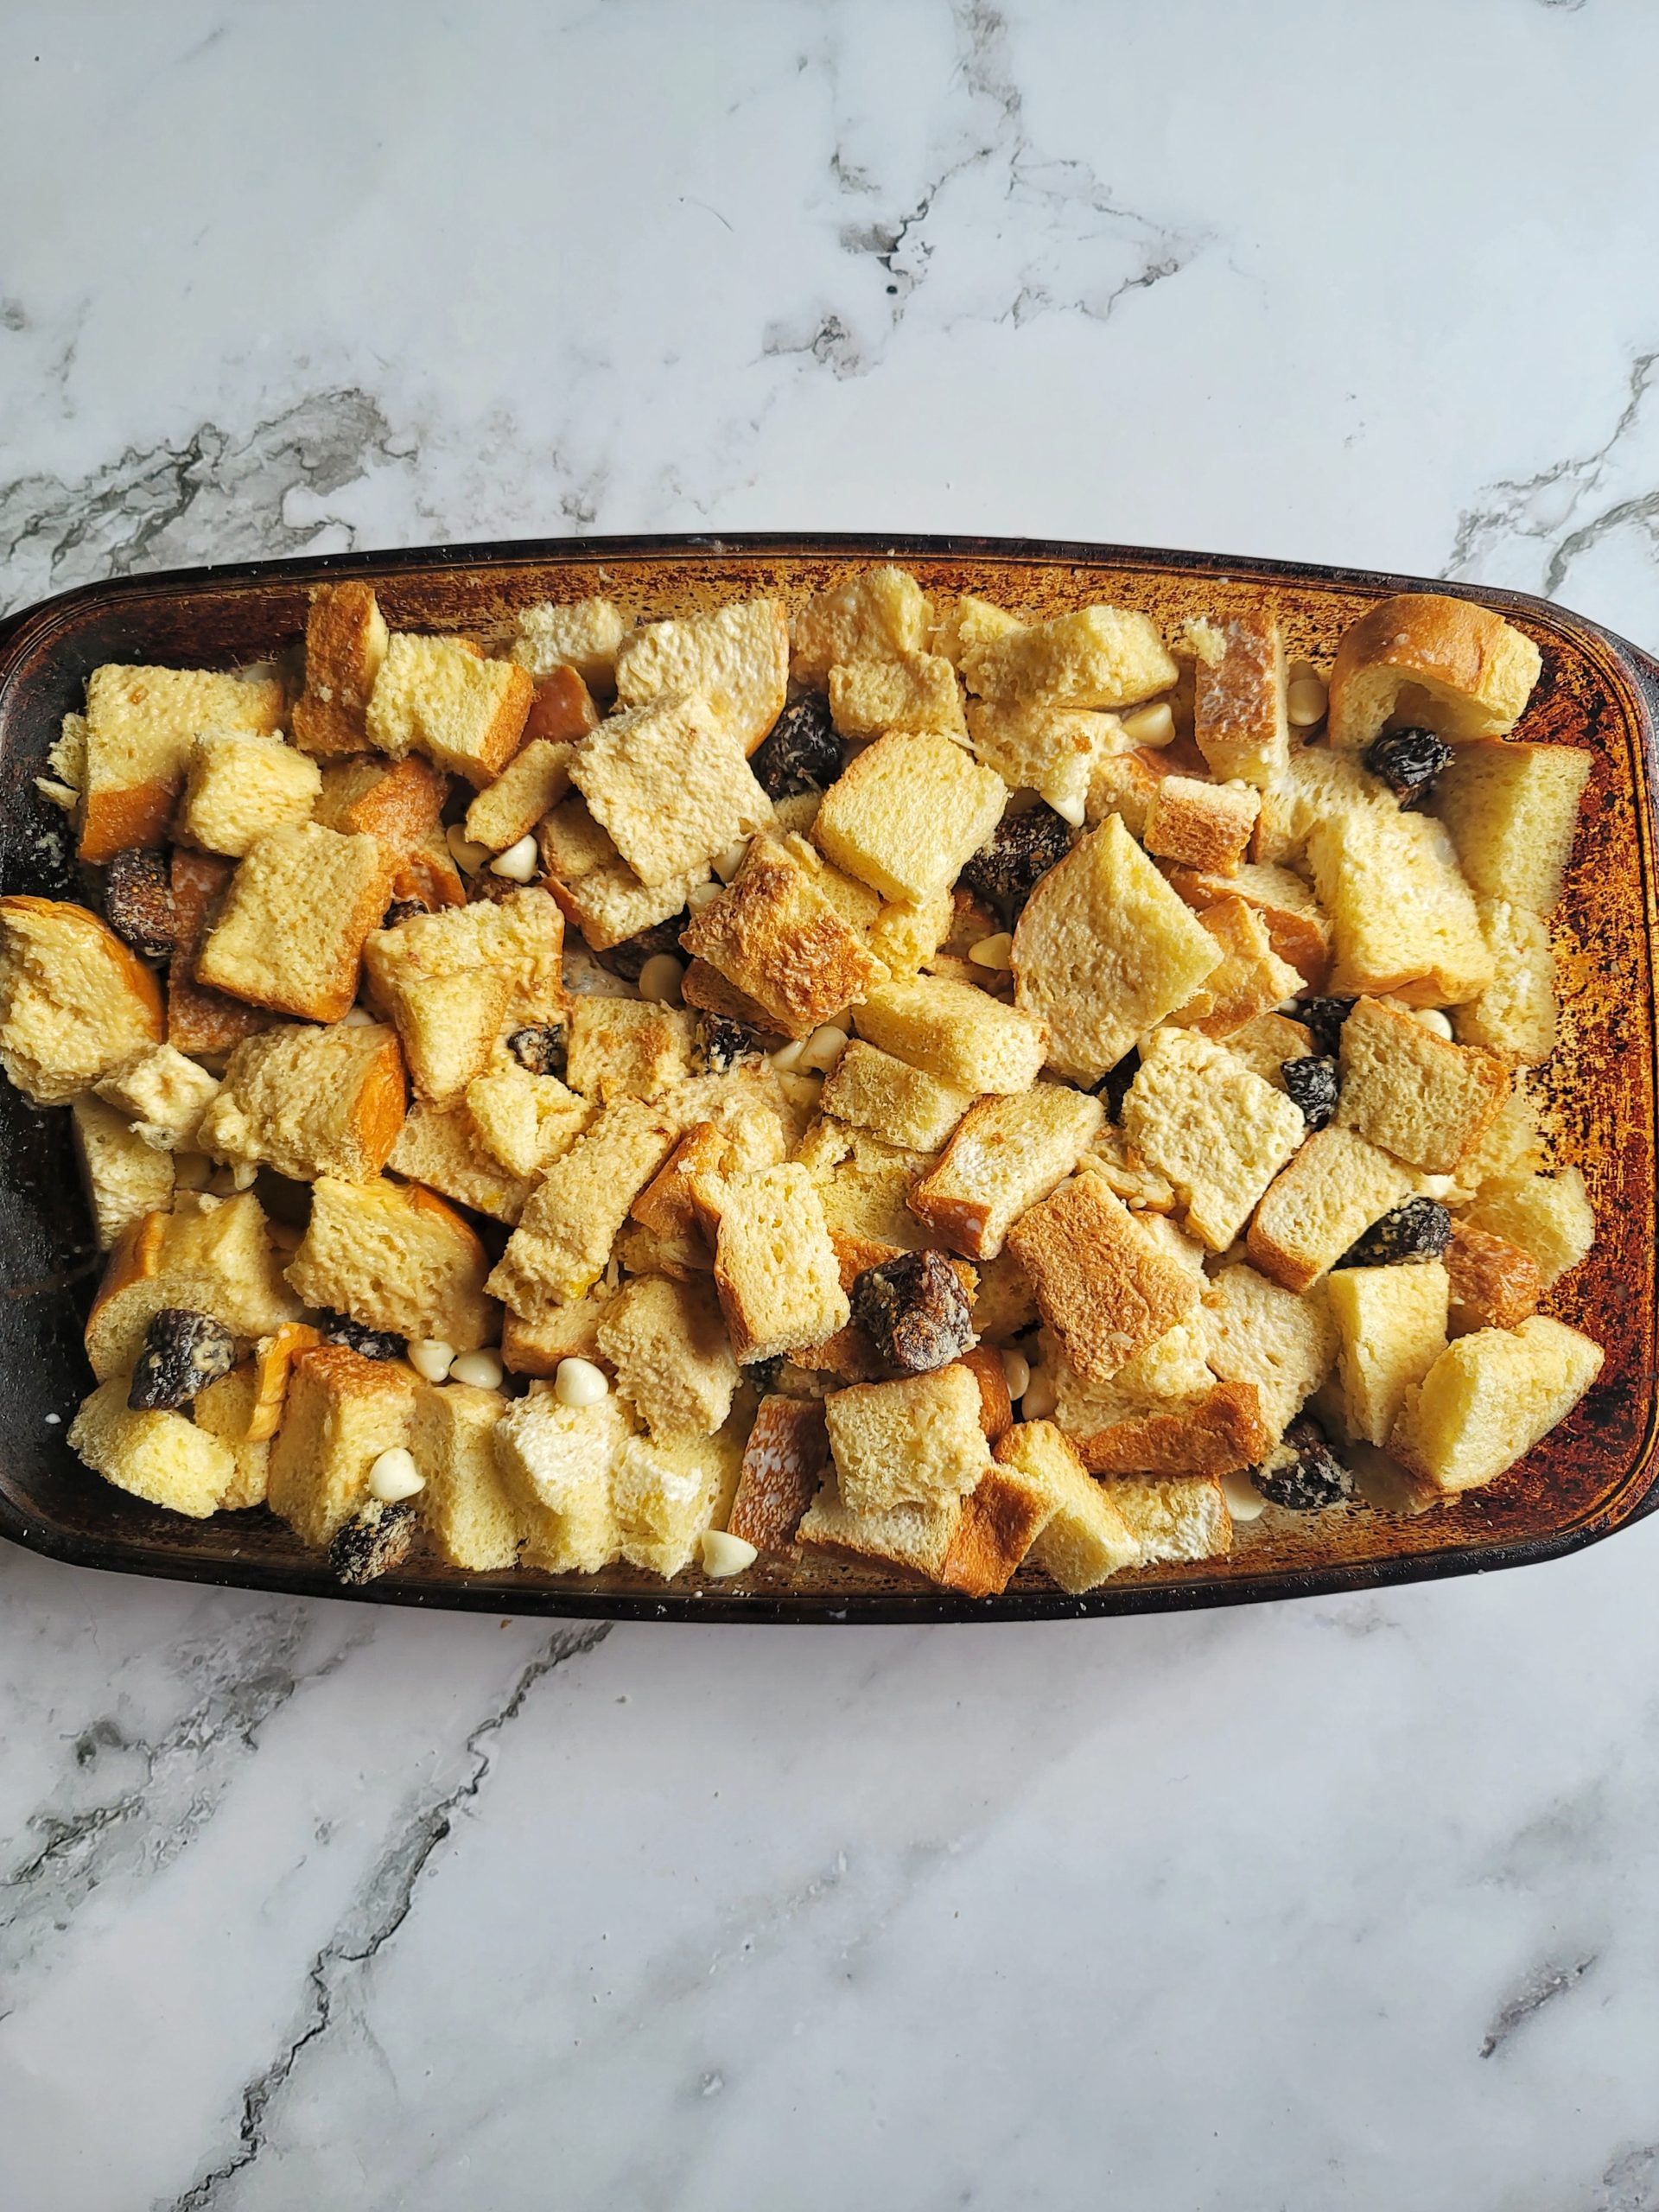 Cubed bread in a baking dish for bread pudding